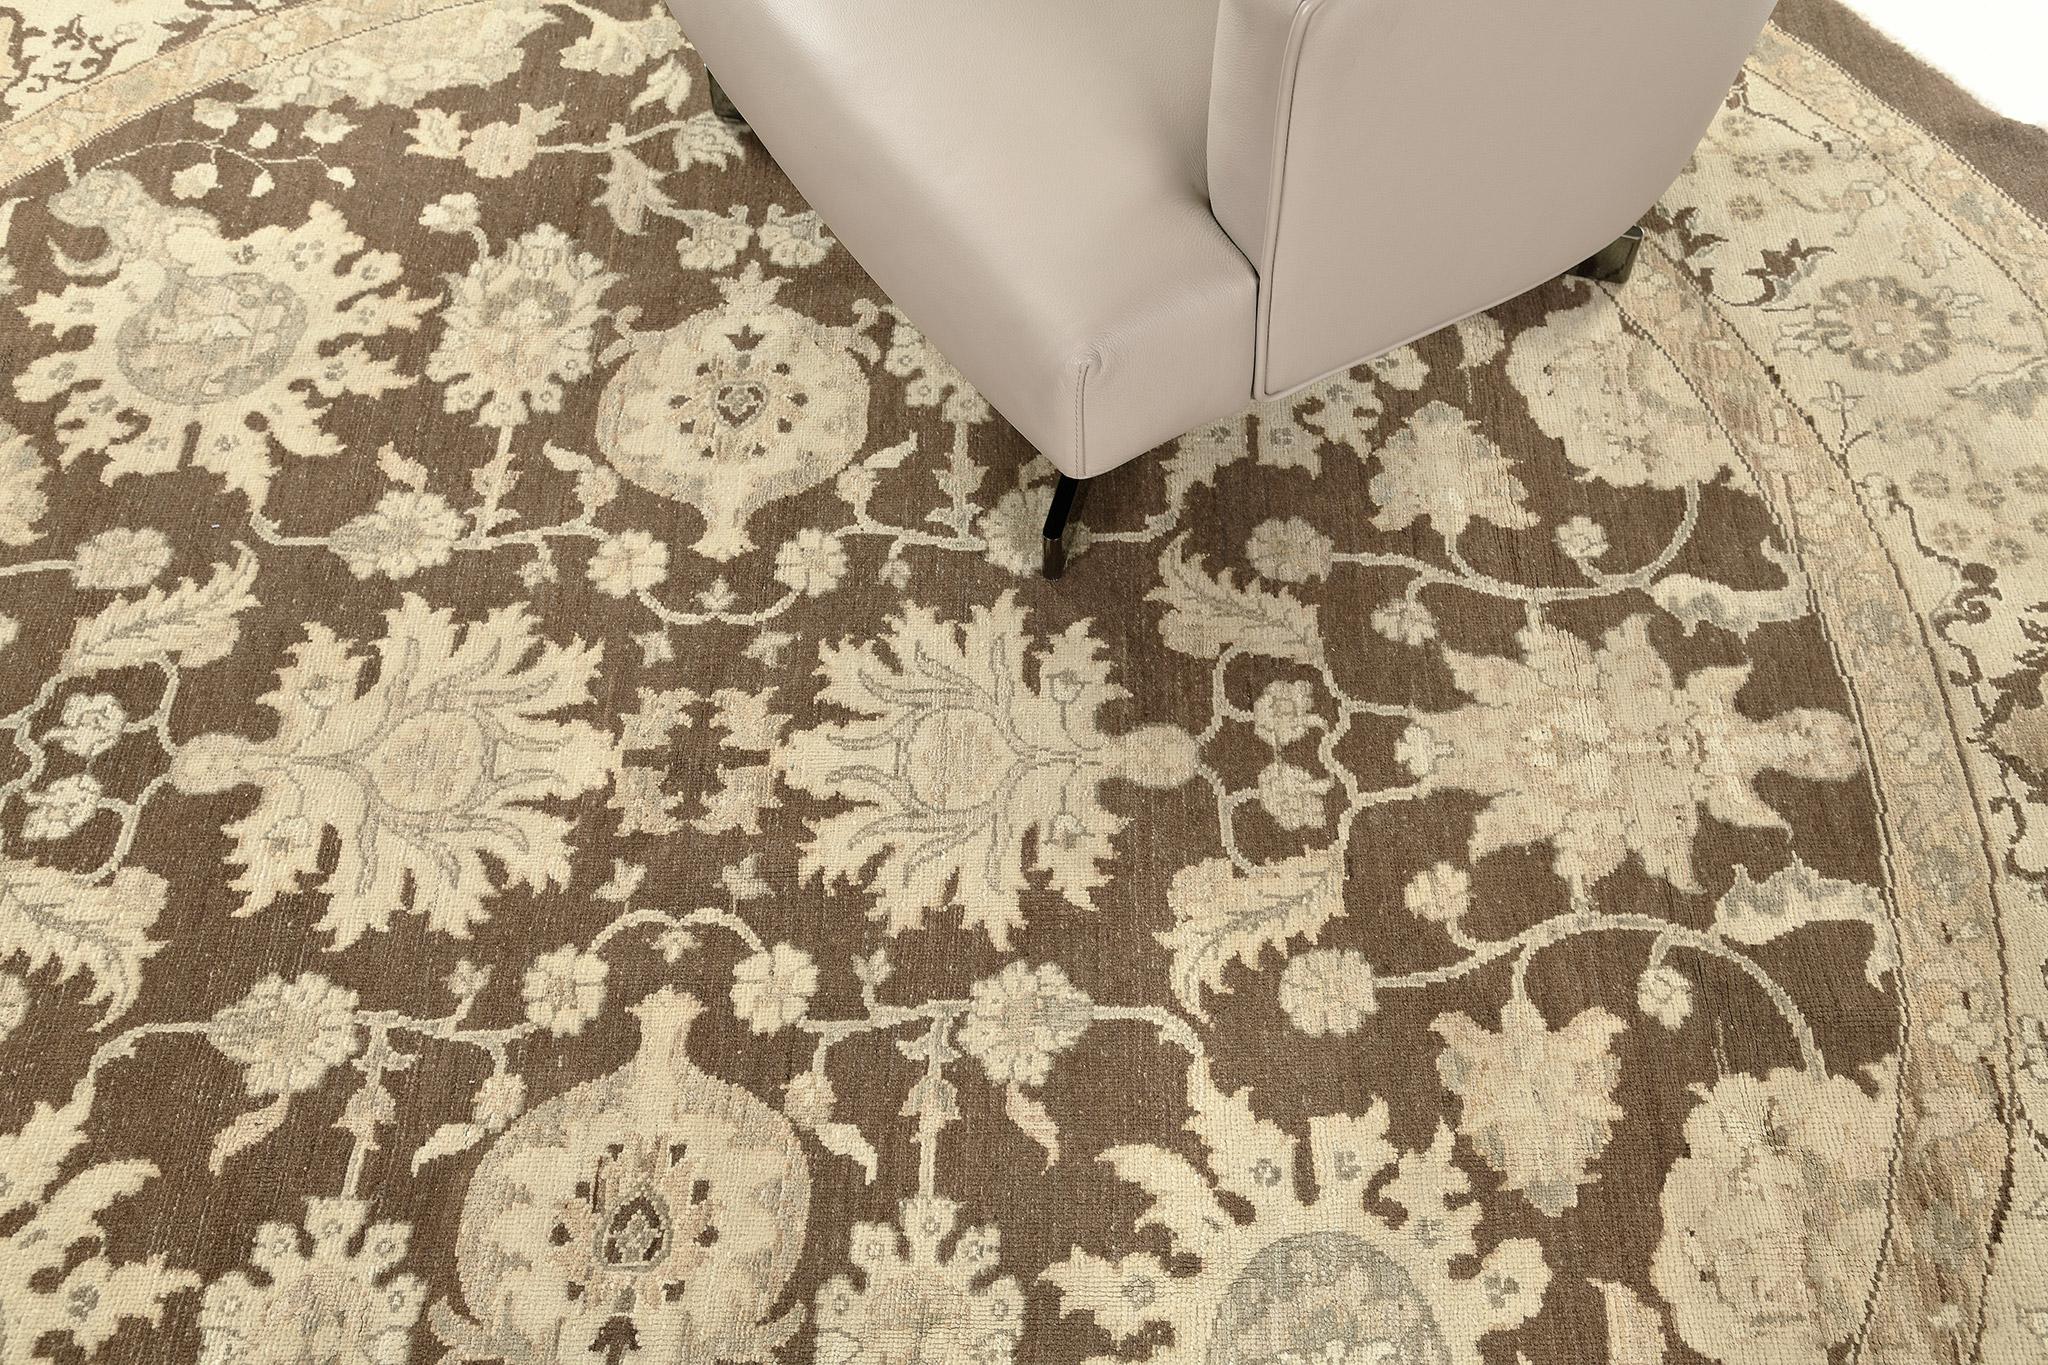 Series of magical vines and florid ornaments are reflected through brilliant embellishments to blooming and calming neutral fields. The borders are beautifully hand-woven that created from a vegetable dye to form an elegant Sultanabad Round Rug.